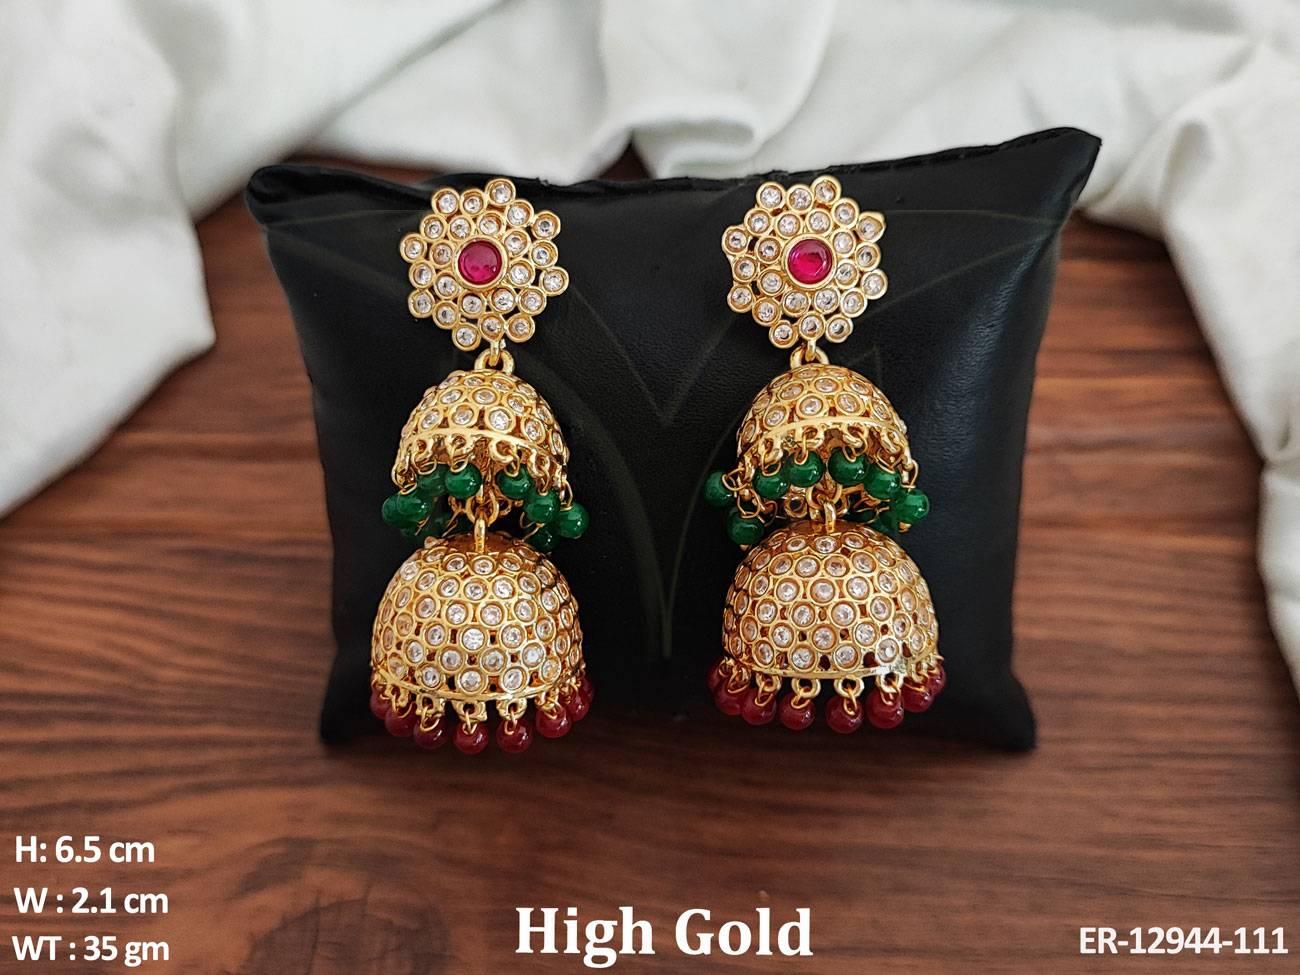 Introducing our exquisite Antique Jewellery High Gold Polish Clusterpearls Three Layer Antique Jhumka Earrings